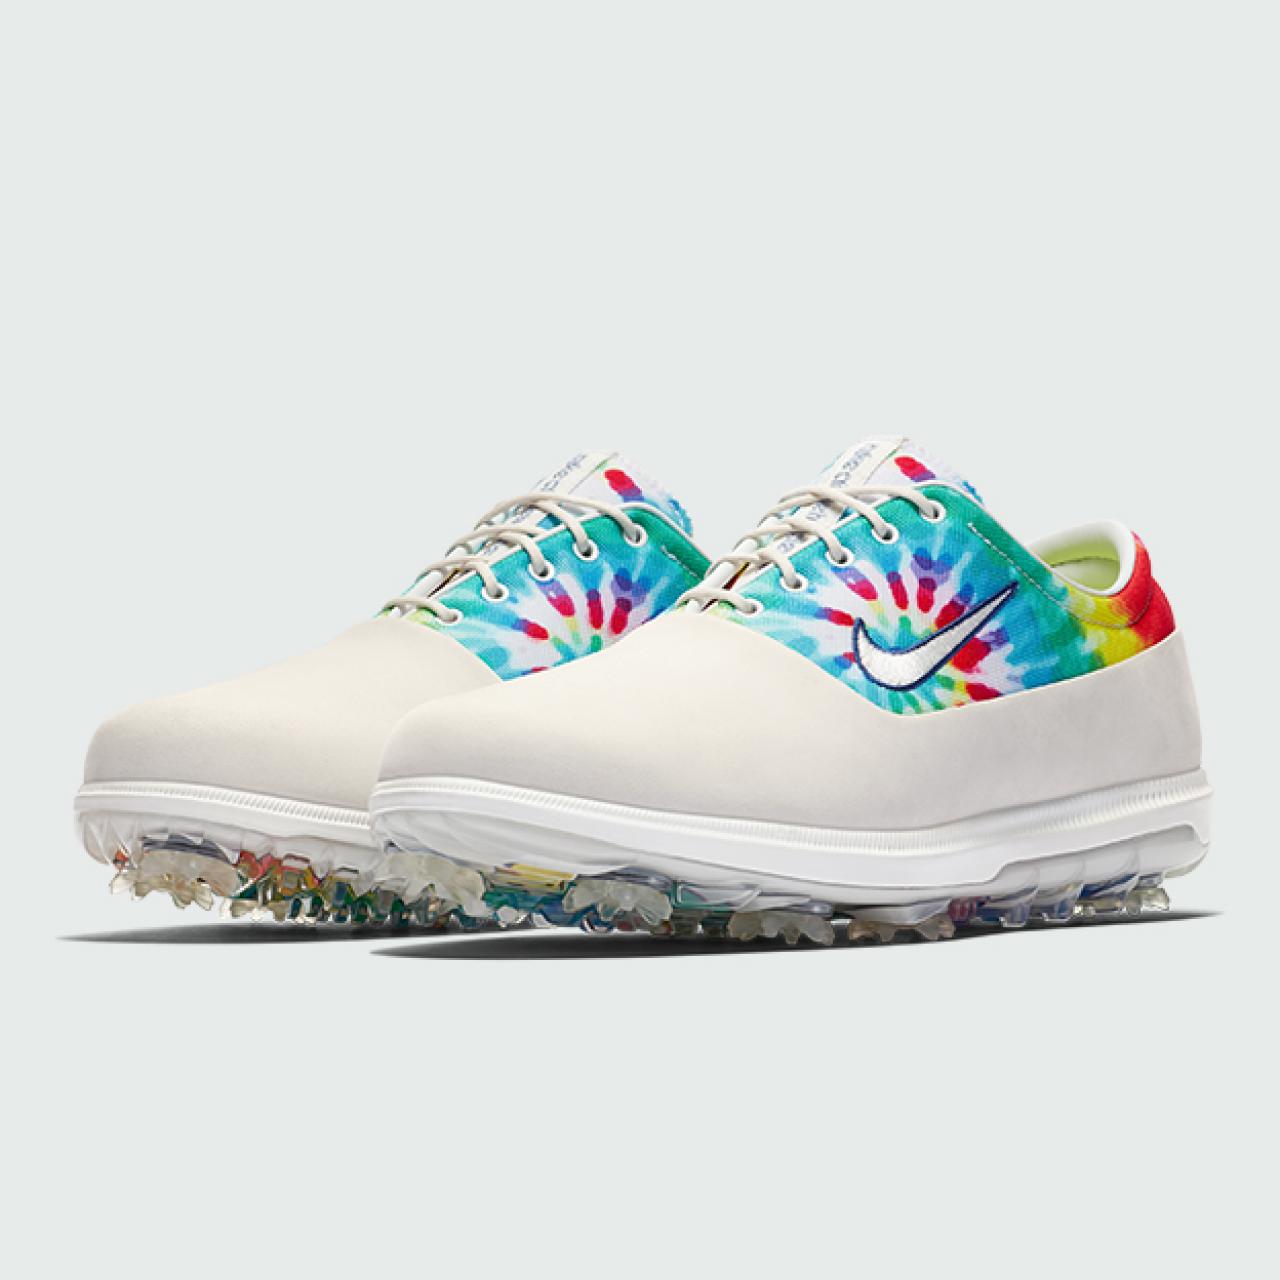 colorful nike golf shoes